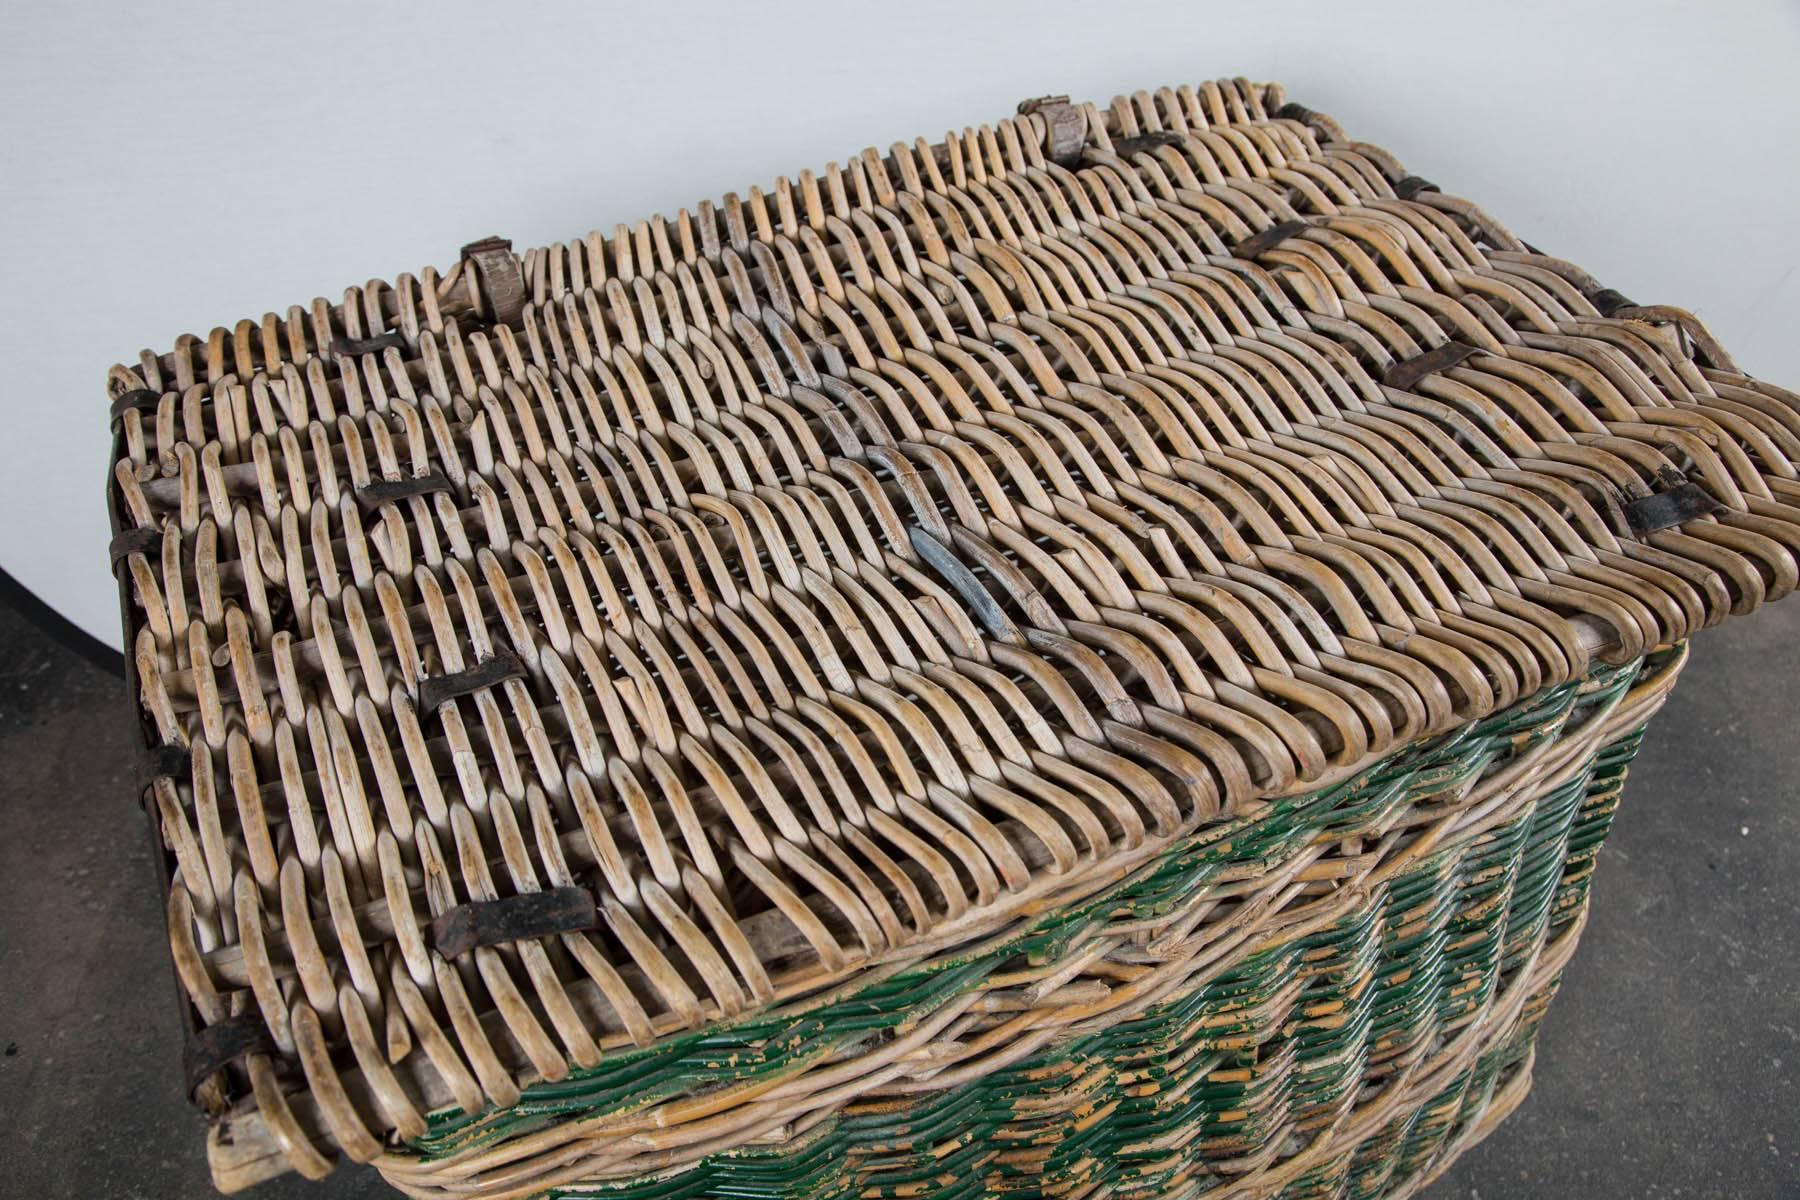 French woven rattan lidded basket with handles, circa 1920s. Grand size storage basket or trunk. Original paint, leather straps and iron hardware.